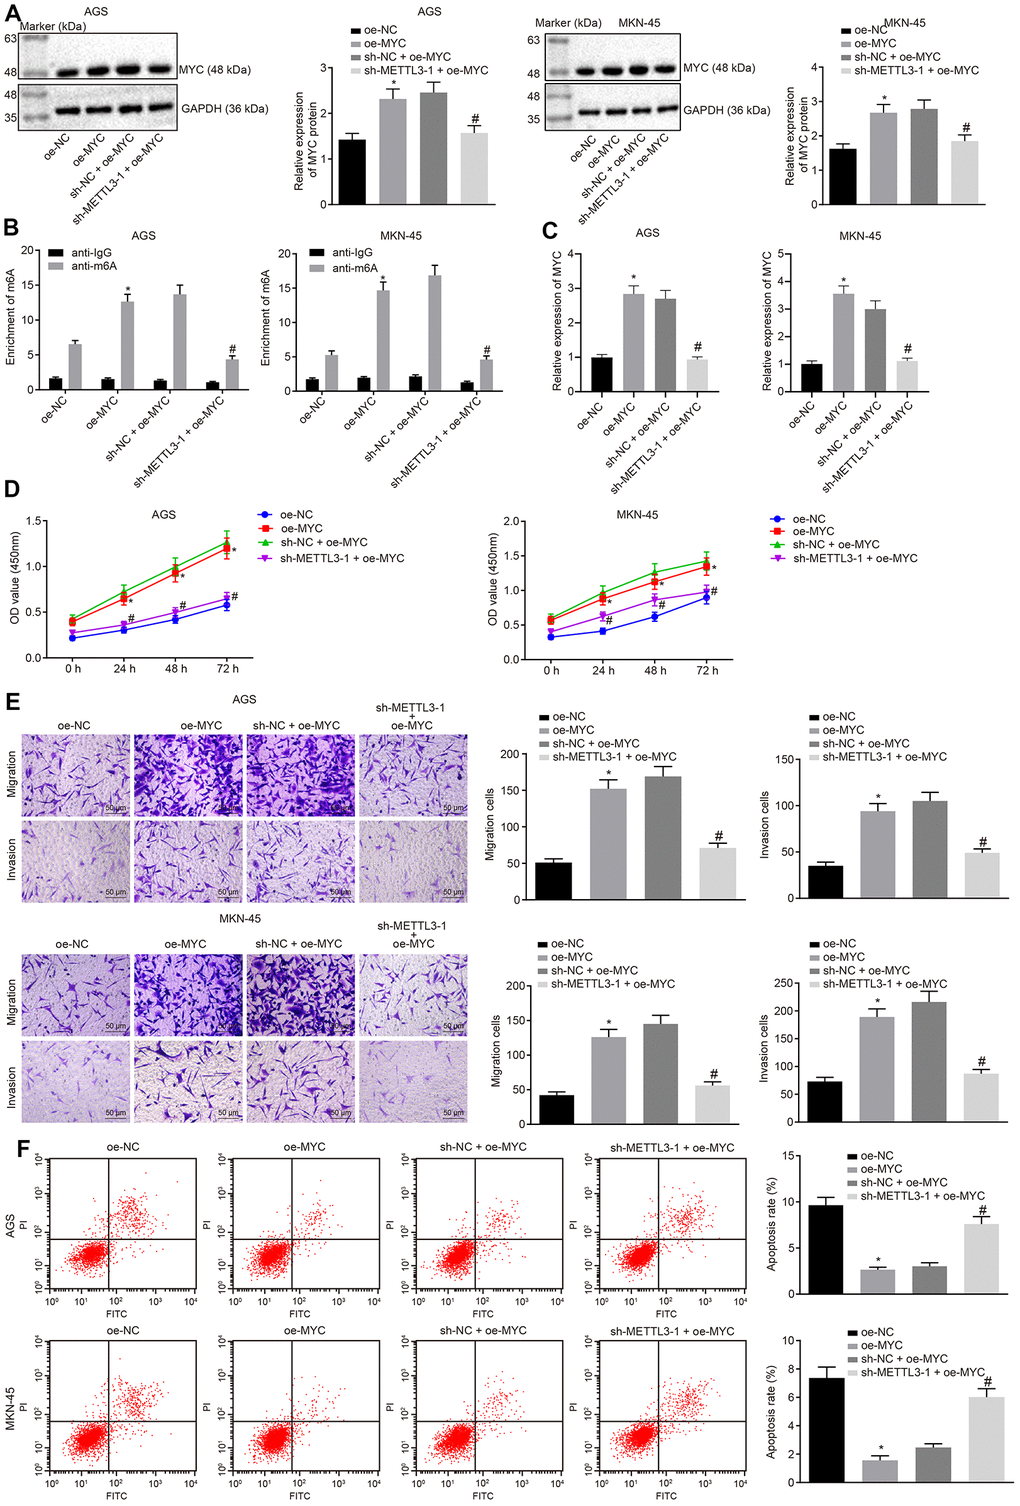 METTL3 inhibits GC cell viability, migration and invasion, and induces apoptosis by mediating MYC mRNA m6A modification. (A) Representative Western blots of MYC protein and its quantitation in GC cells treated with oe-MYC or combined with sh-METTL3-1, normalized to GAPDH. (B) Me-RIP and RT-qPCR were used to examine m6A levels of MYC mRAN in GC cells treated with oe-MYC or combined with sh-METTL3-1. (C) The binding of METTL3 to MYC mRNA assessed by PAR-CLIP assay in GC cells treated with oe-MYC or combined with sh-METTL3-1. (D) CCK-8 was used to examine the proliferation of GC cells treated with oe-MYC or combined with sh-METTL3-1. (E) Transwell was used to examine the migration and invasion of GC cells treated with oe-MYC or combined with sh-METTL3-1 (× 200). (F) Flow cytometry was used to examine the apoptosis of GC cells treated with oe-MYC or combined with sh-METTL3-1. * p vs. the oe-NC group (GC cells treated with oe-NC). # p vs. the sh-NC + oe-MYC group (GC cells treated with sh-NC and oe-MYC). The above data were all measured data, expressed as mean ± standard deviation. Data in panels (A–C, E and F) by one-way ANOVA with Tukey’s post hoc test, and in panel D by repeated measures ANOVA with Bonferroni post hoc test. The cell experiment was repeated 3 times independently.